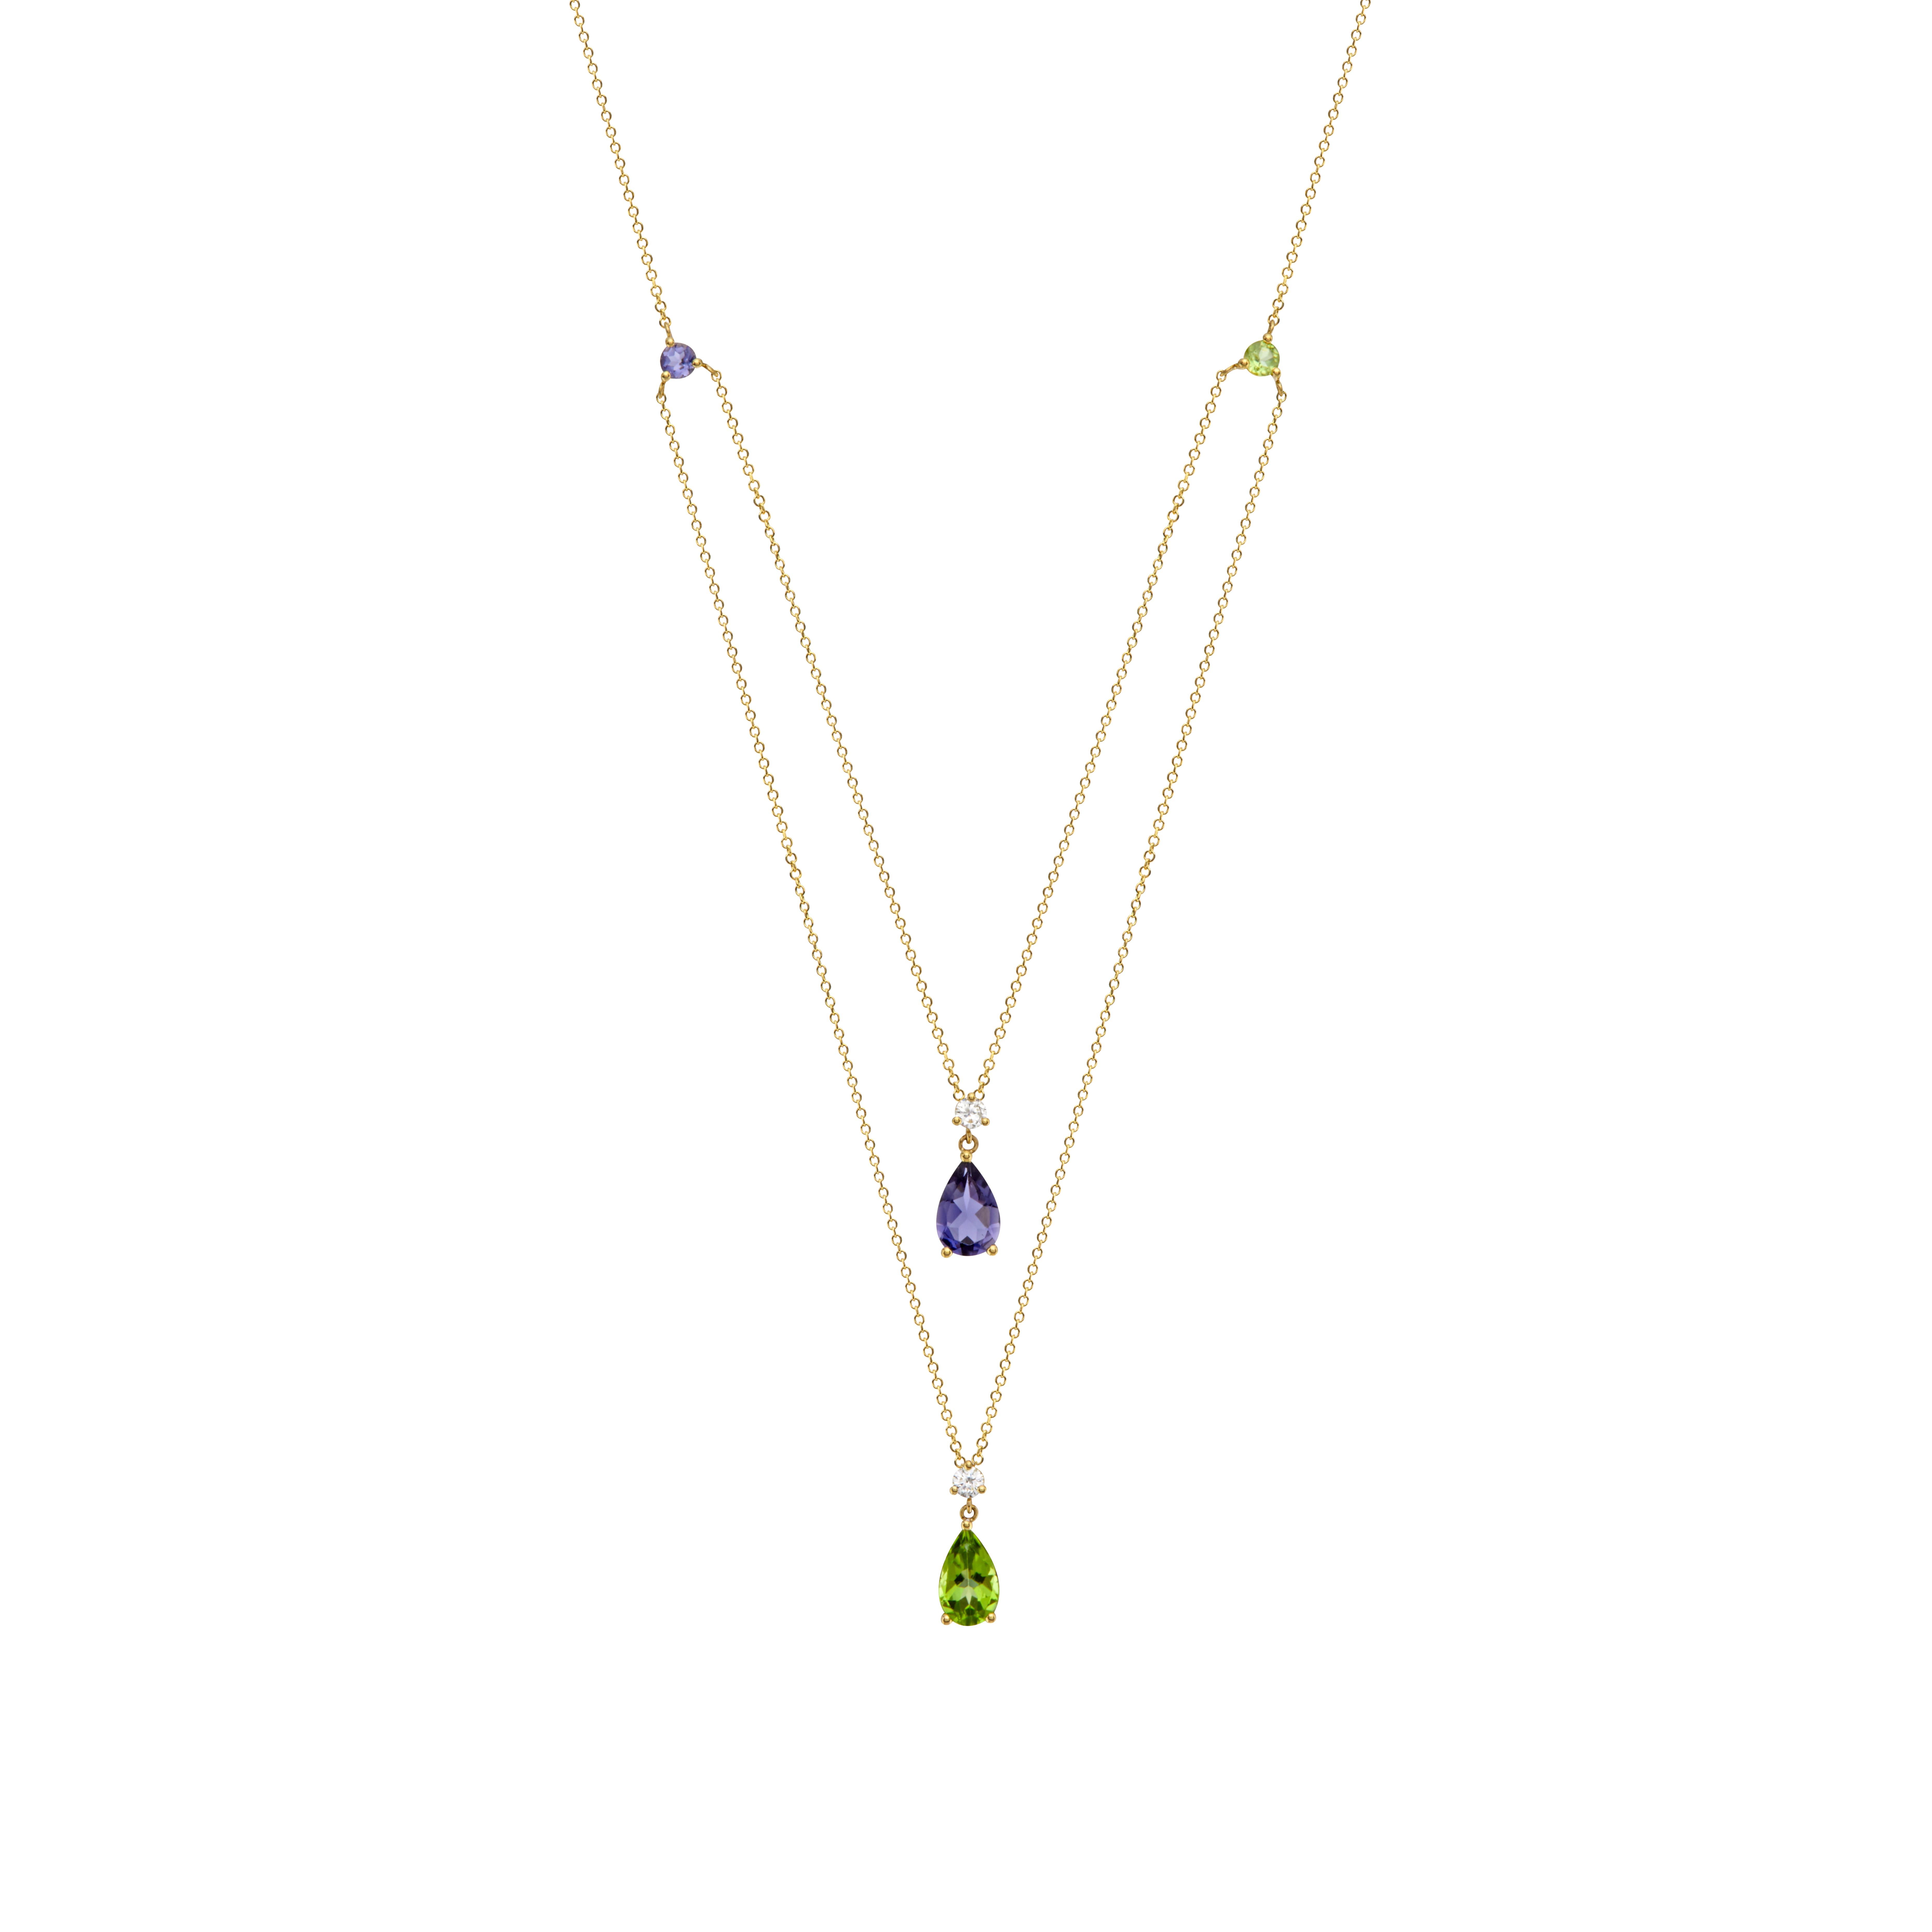 Double Pendant Necklace in 18Kt Yellow Gold with Peridot Iolite and Diamonds